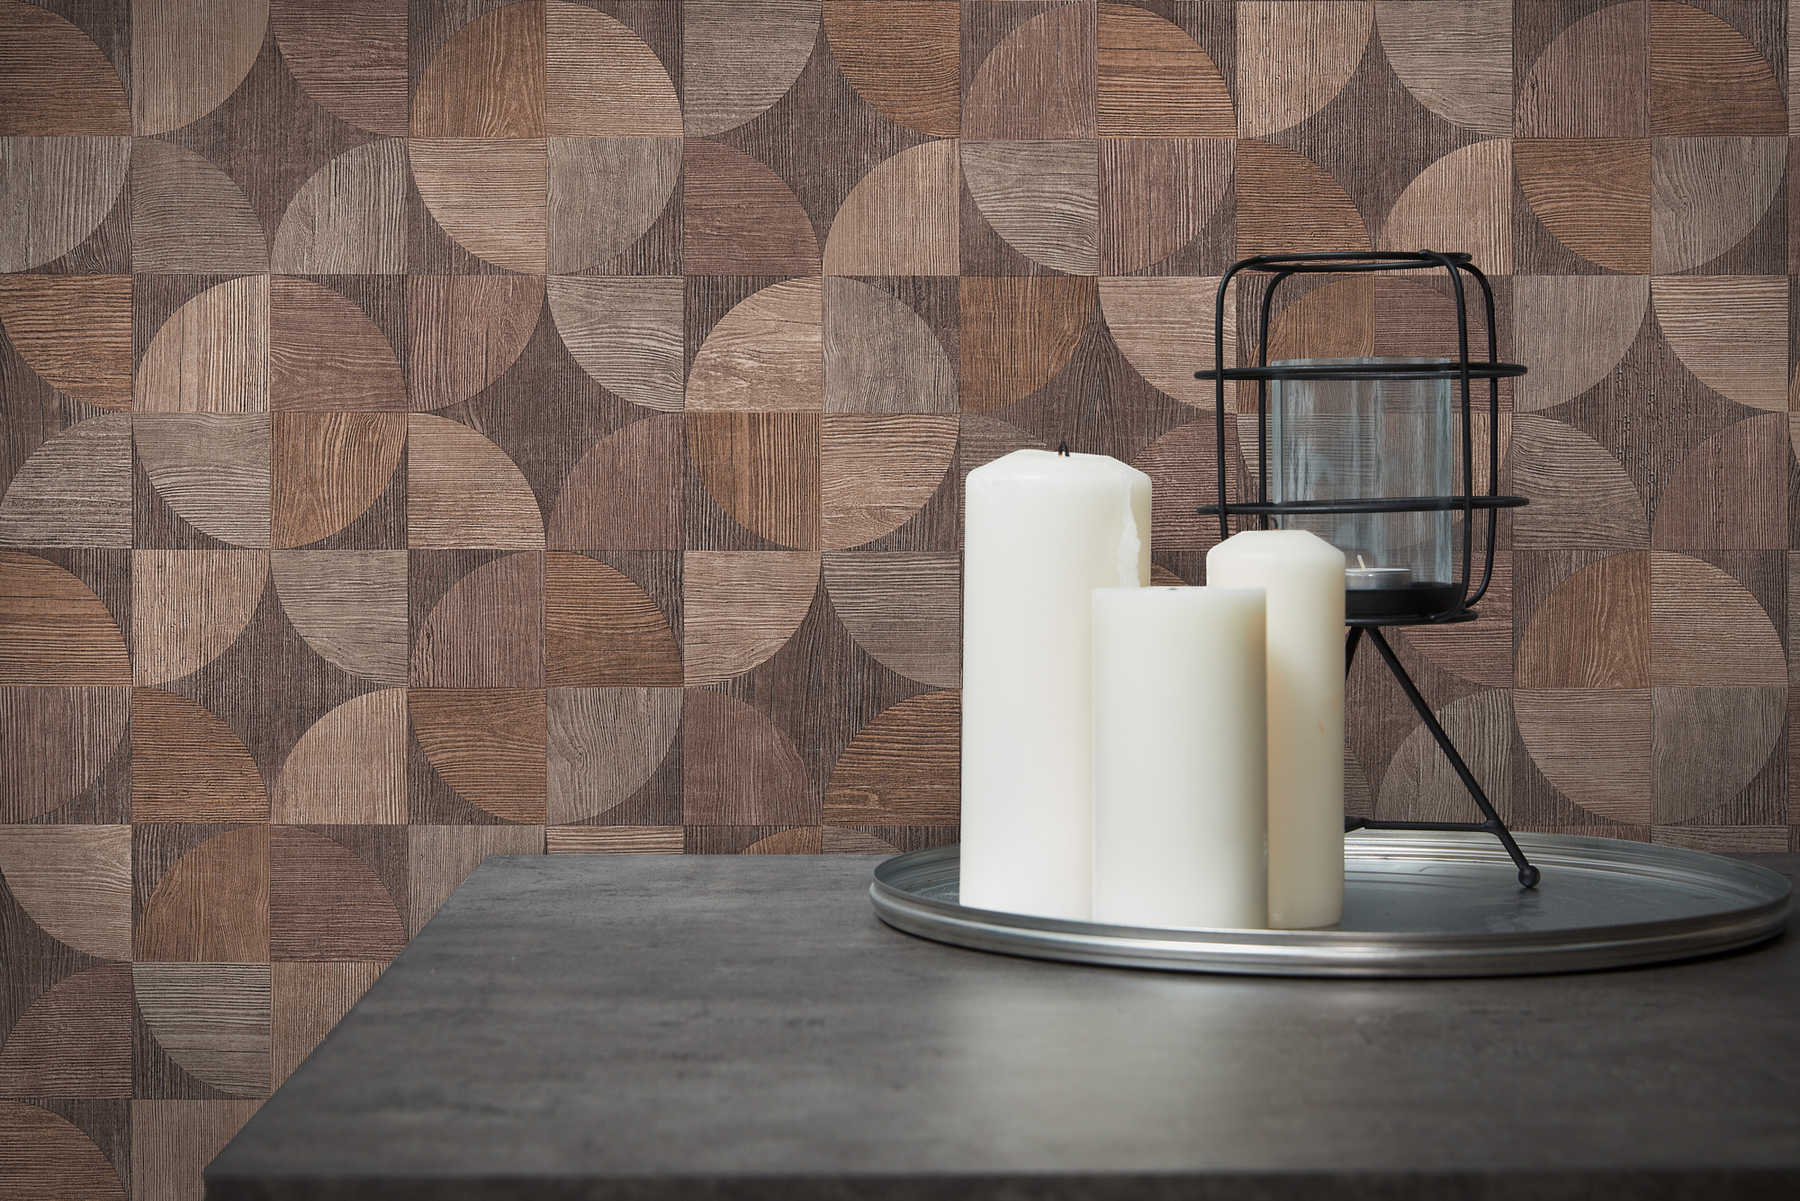             Wallpaper with graphic pattern in wood look - brown, beige, grey
        